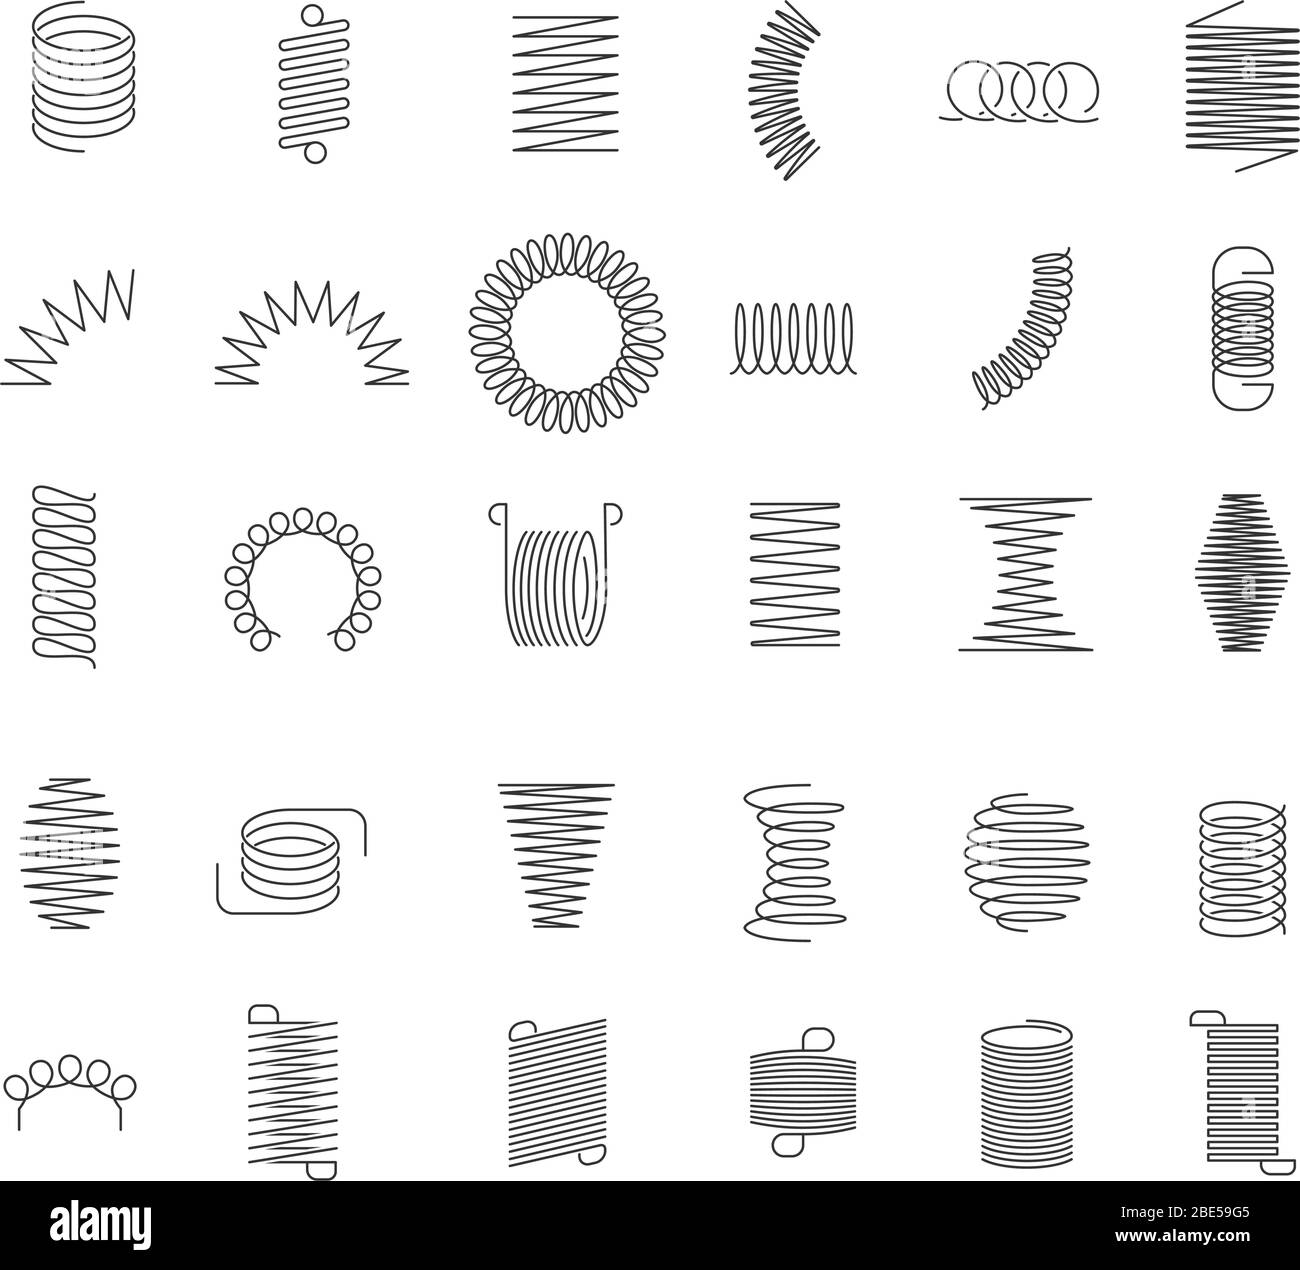 Metal spiral spring. Metallic coils, motor machine spiral sign, wire springs and steel curved flexible coils. Linear spirals silhouette isolated Stock Vector